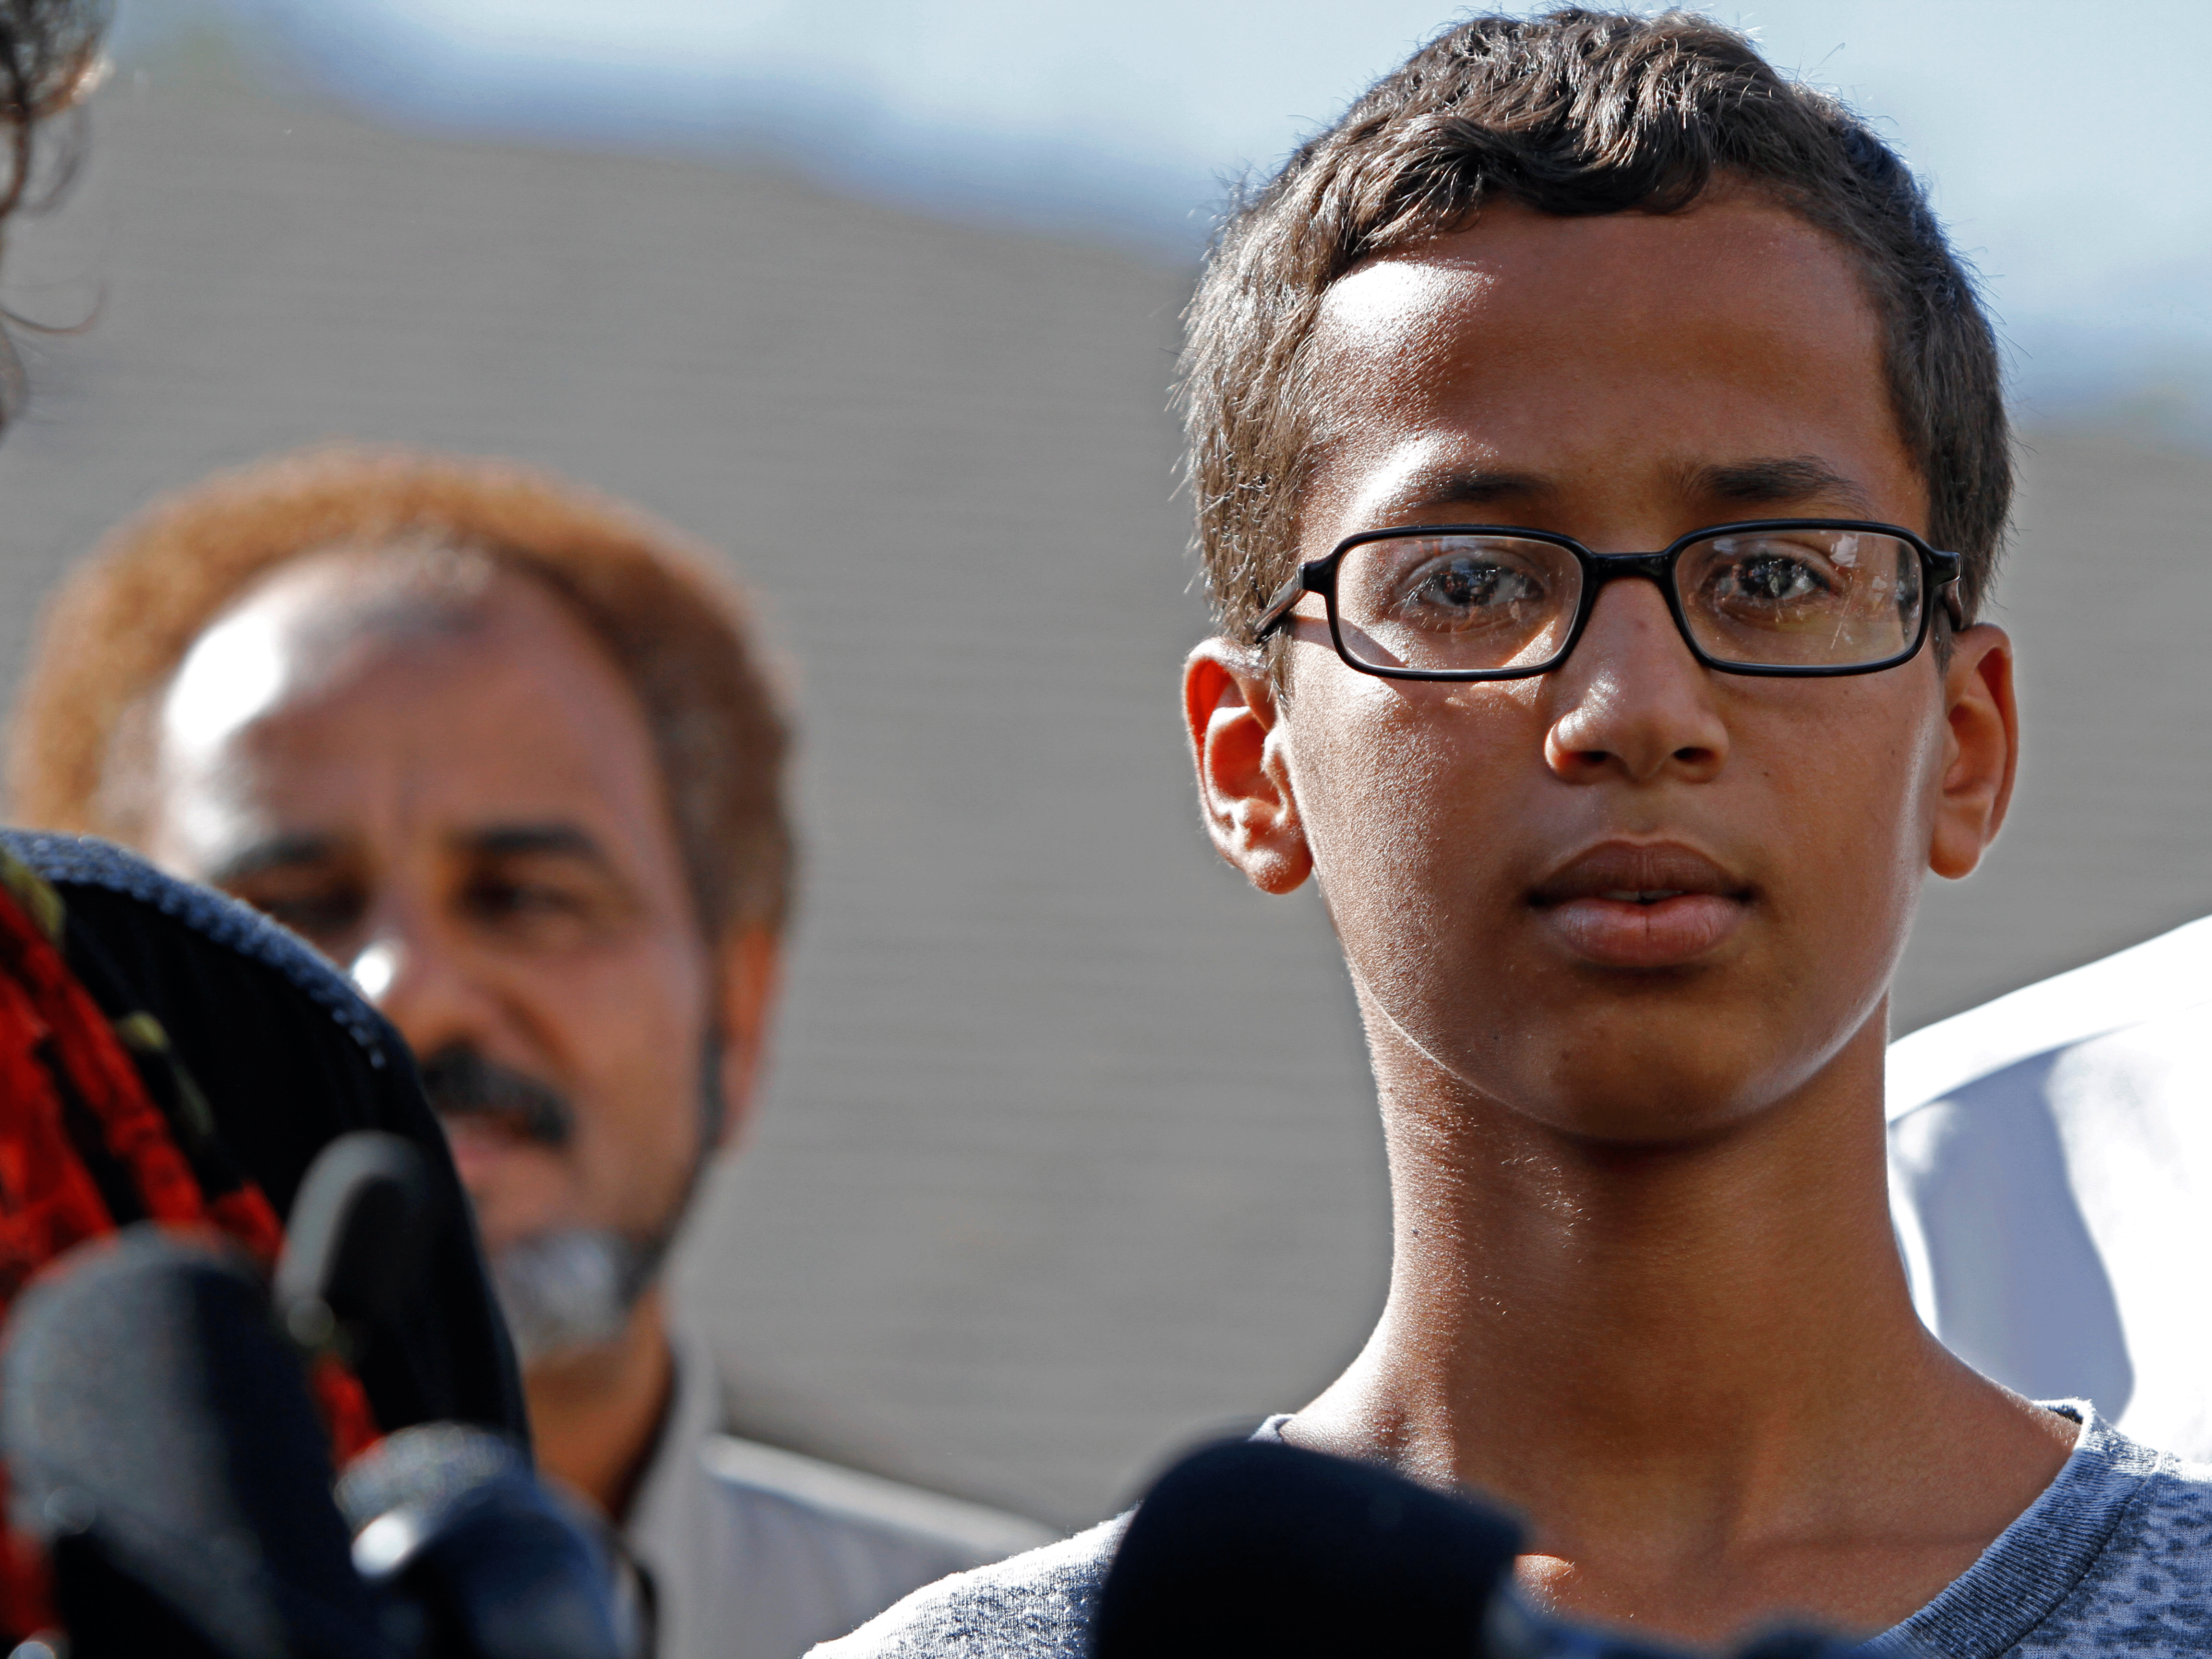 Ahmed Mohamed was arrested after his homemade clock was mistaken for a bomb